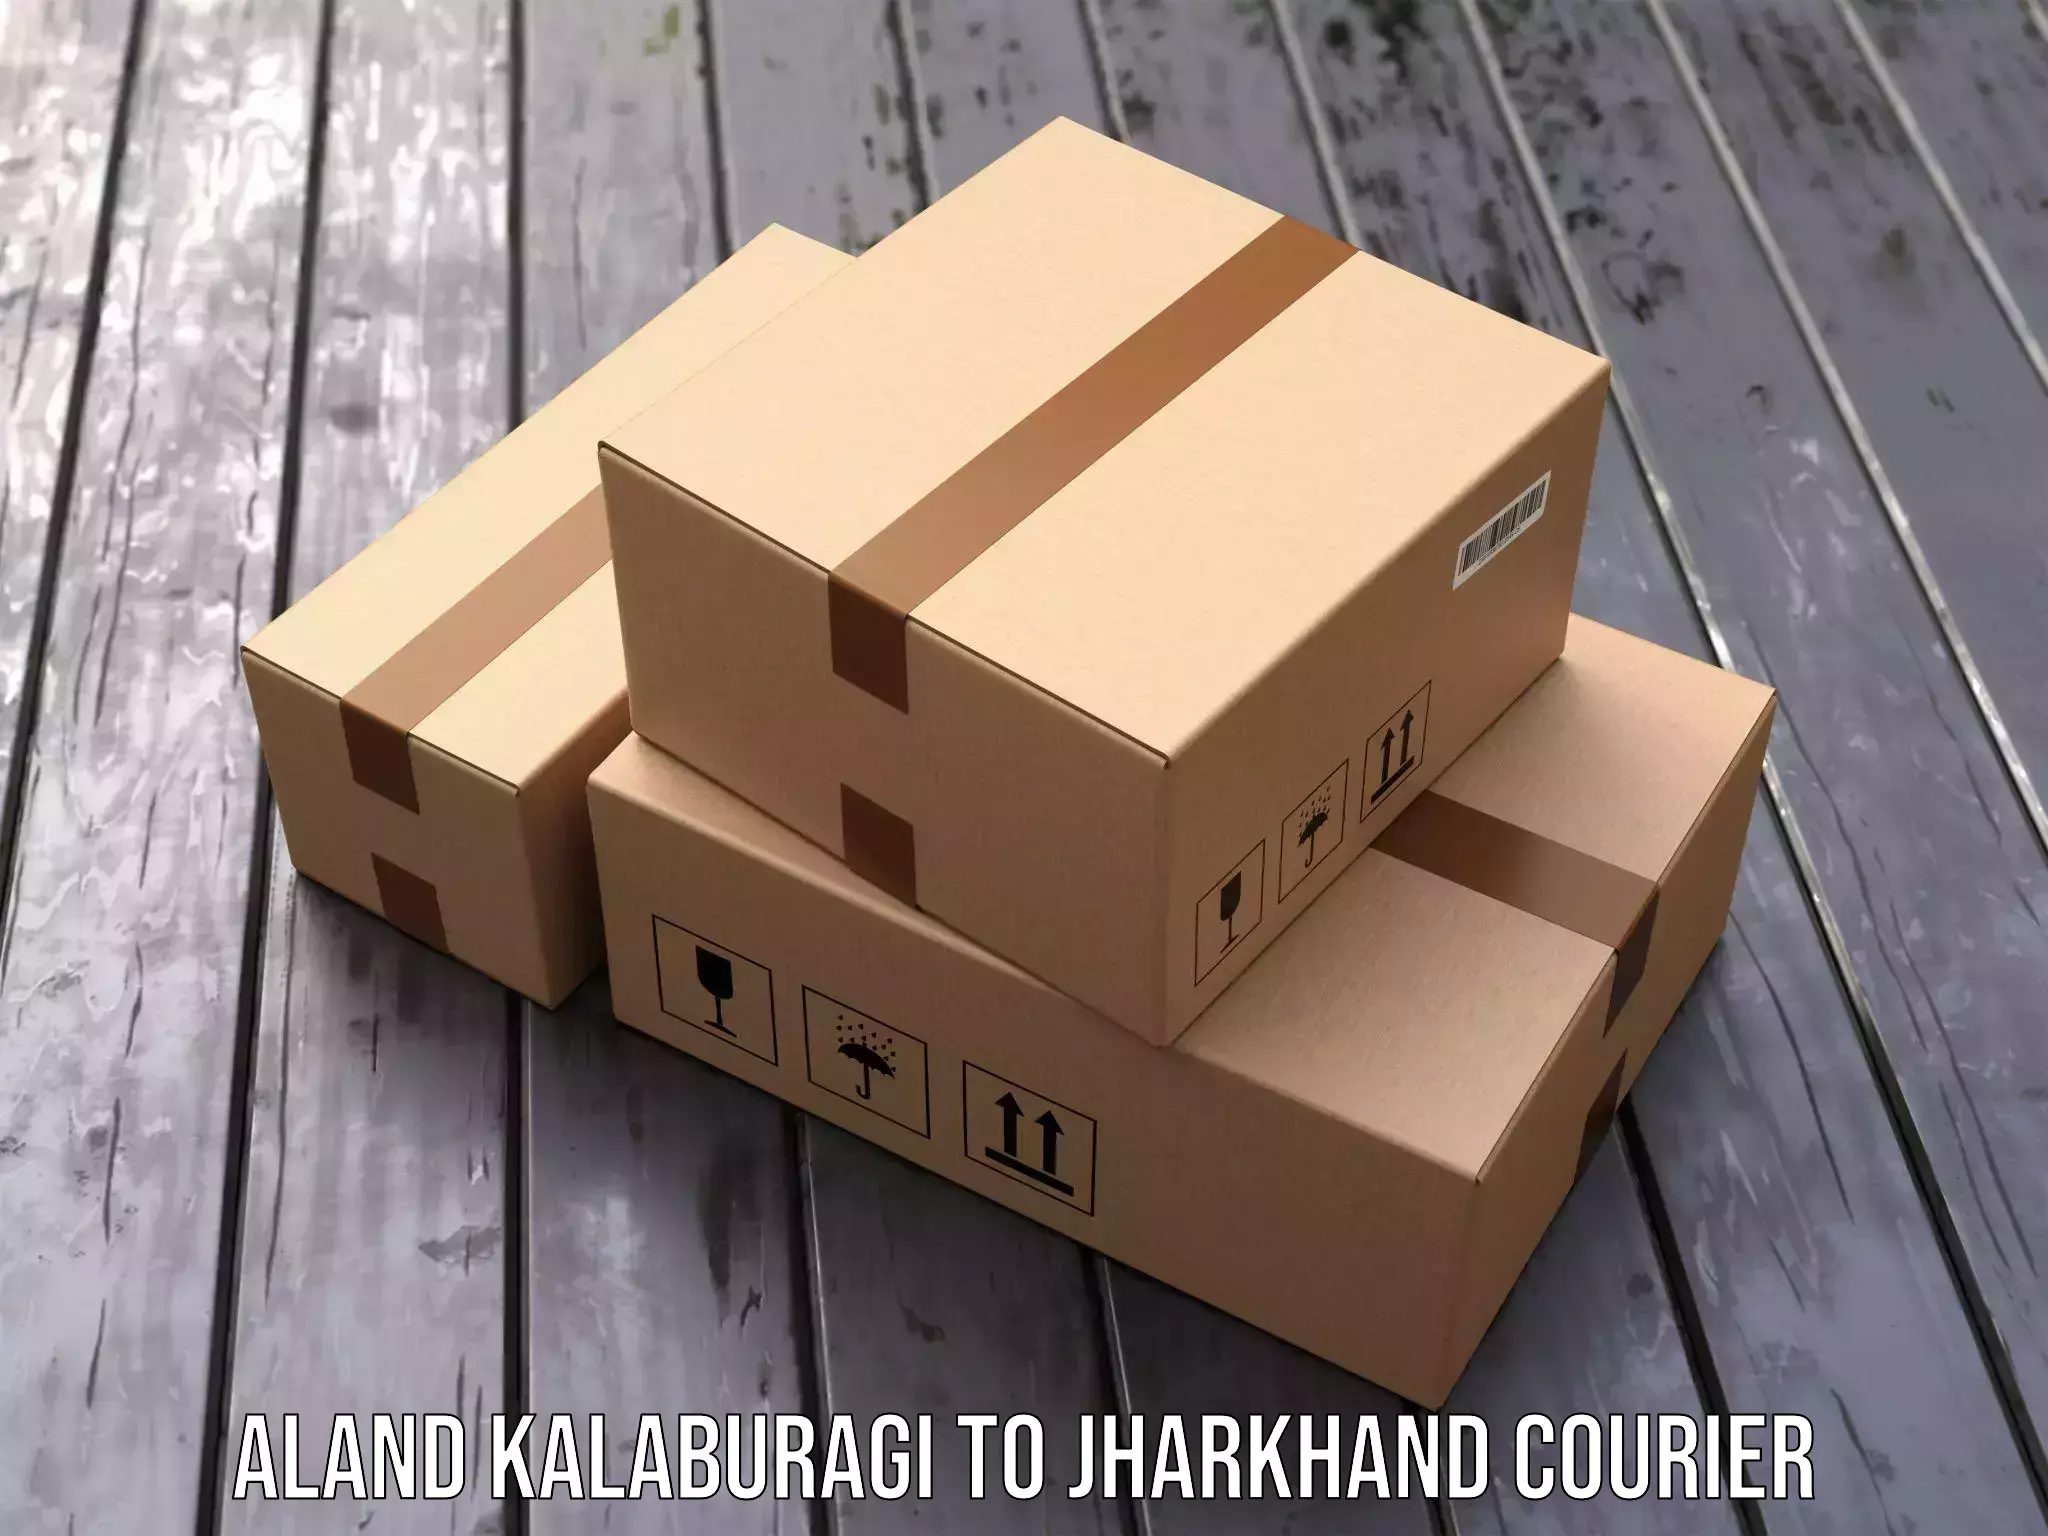 Next-day delivery options in Aland Kalaburagi to Topchanchi